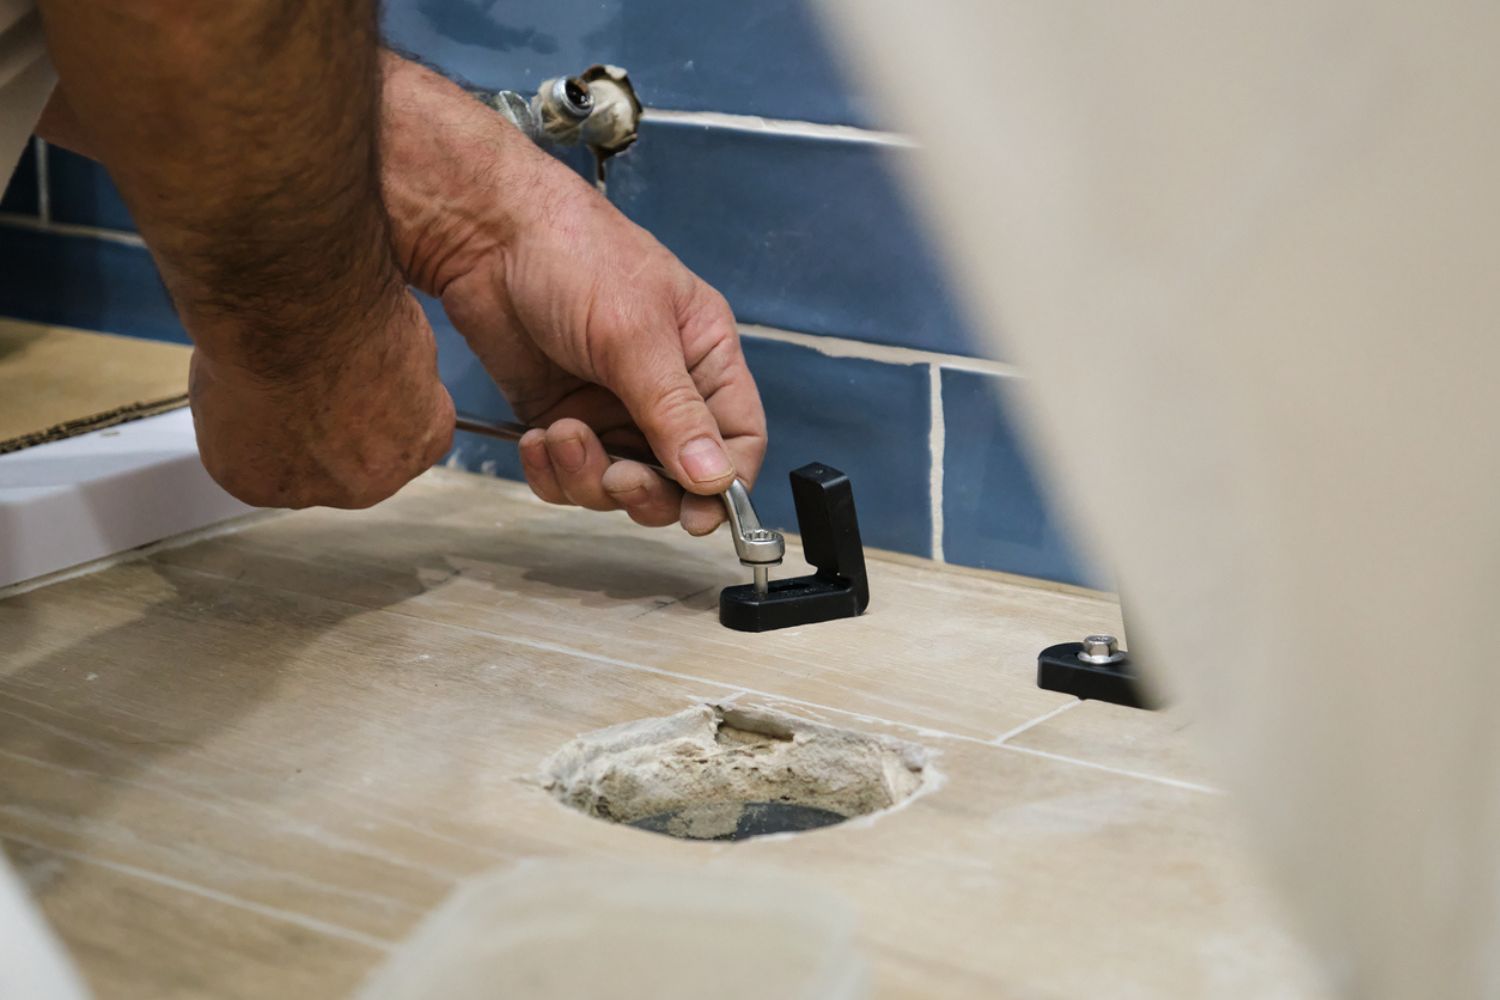 How Much Does It Cost to Replace a Toilet Flange: Bathroom maintenance: plumber replacing the toilet flange